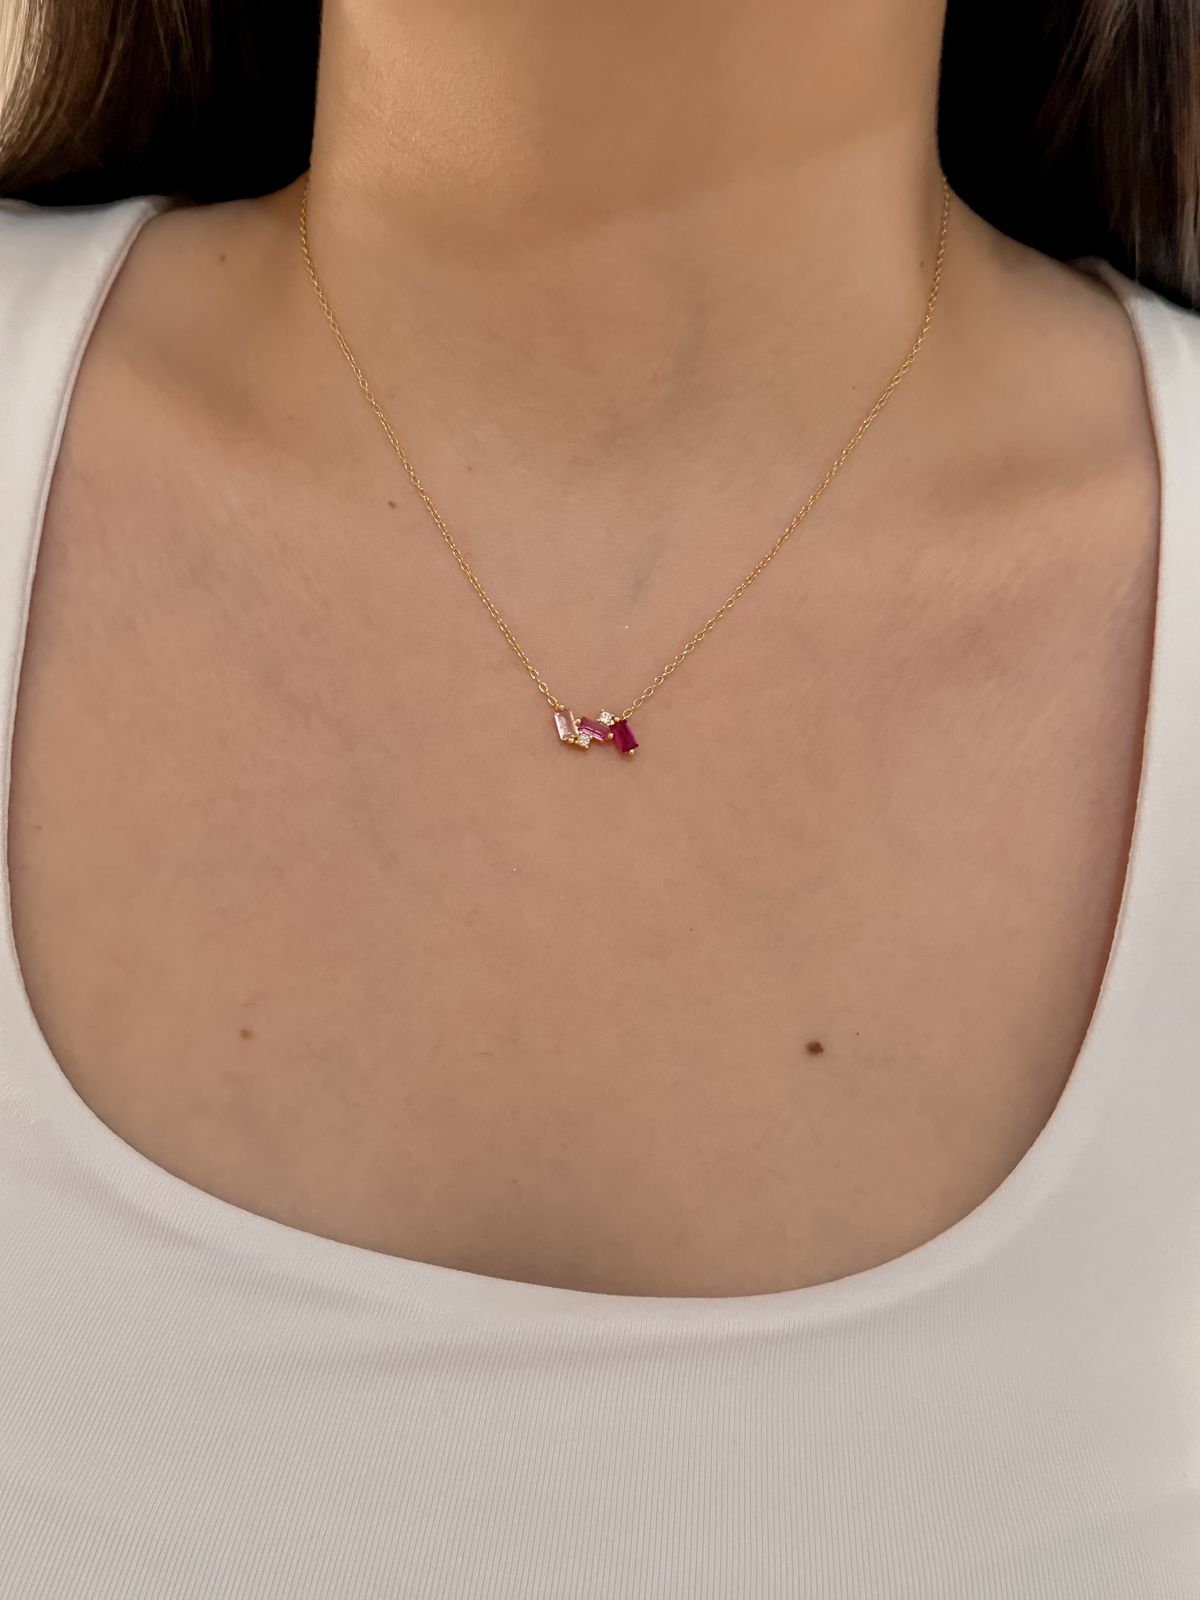 Pinky love necklace